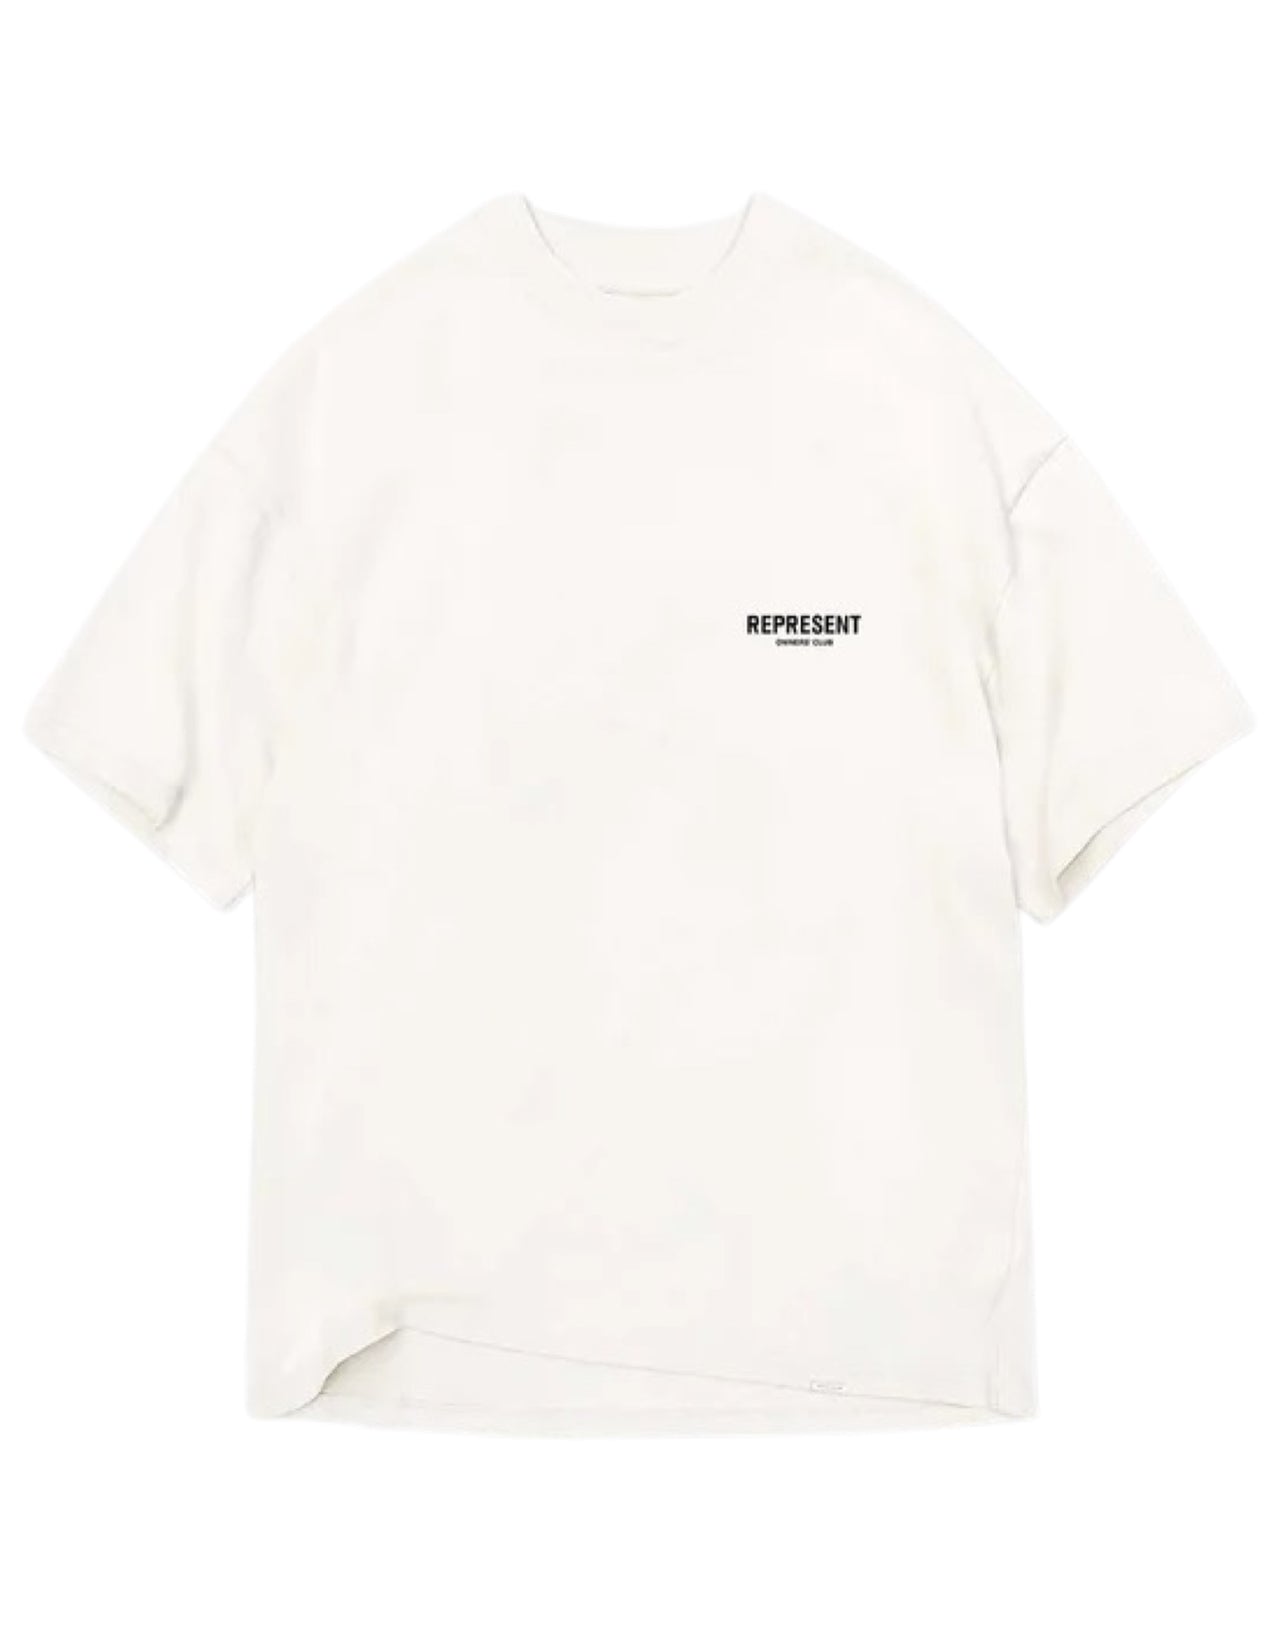 REPRESENT T-SHIRT OWNER'S CLUB WHITE